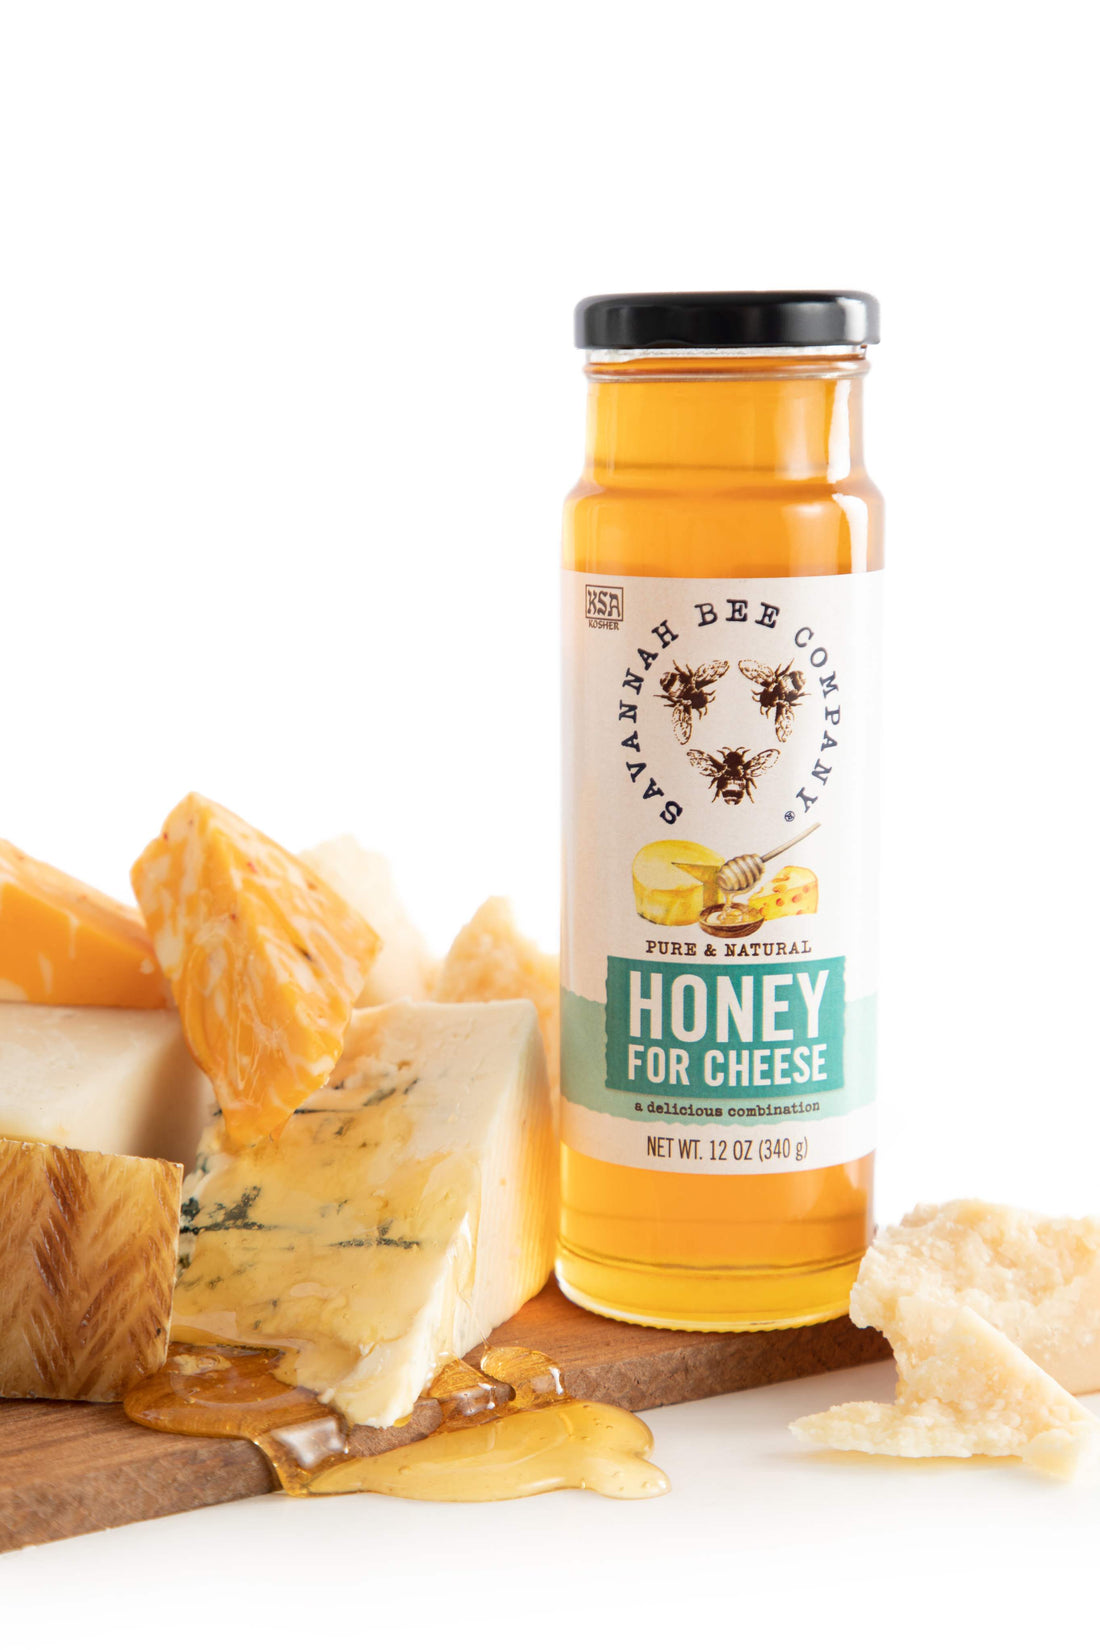 how-to-pair-honey-and-cheese-charcutierie-savannah-bee-company